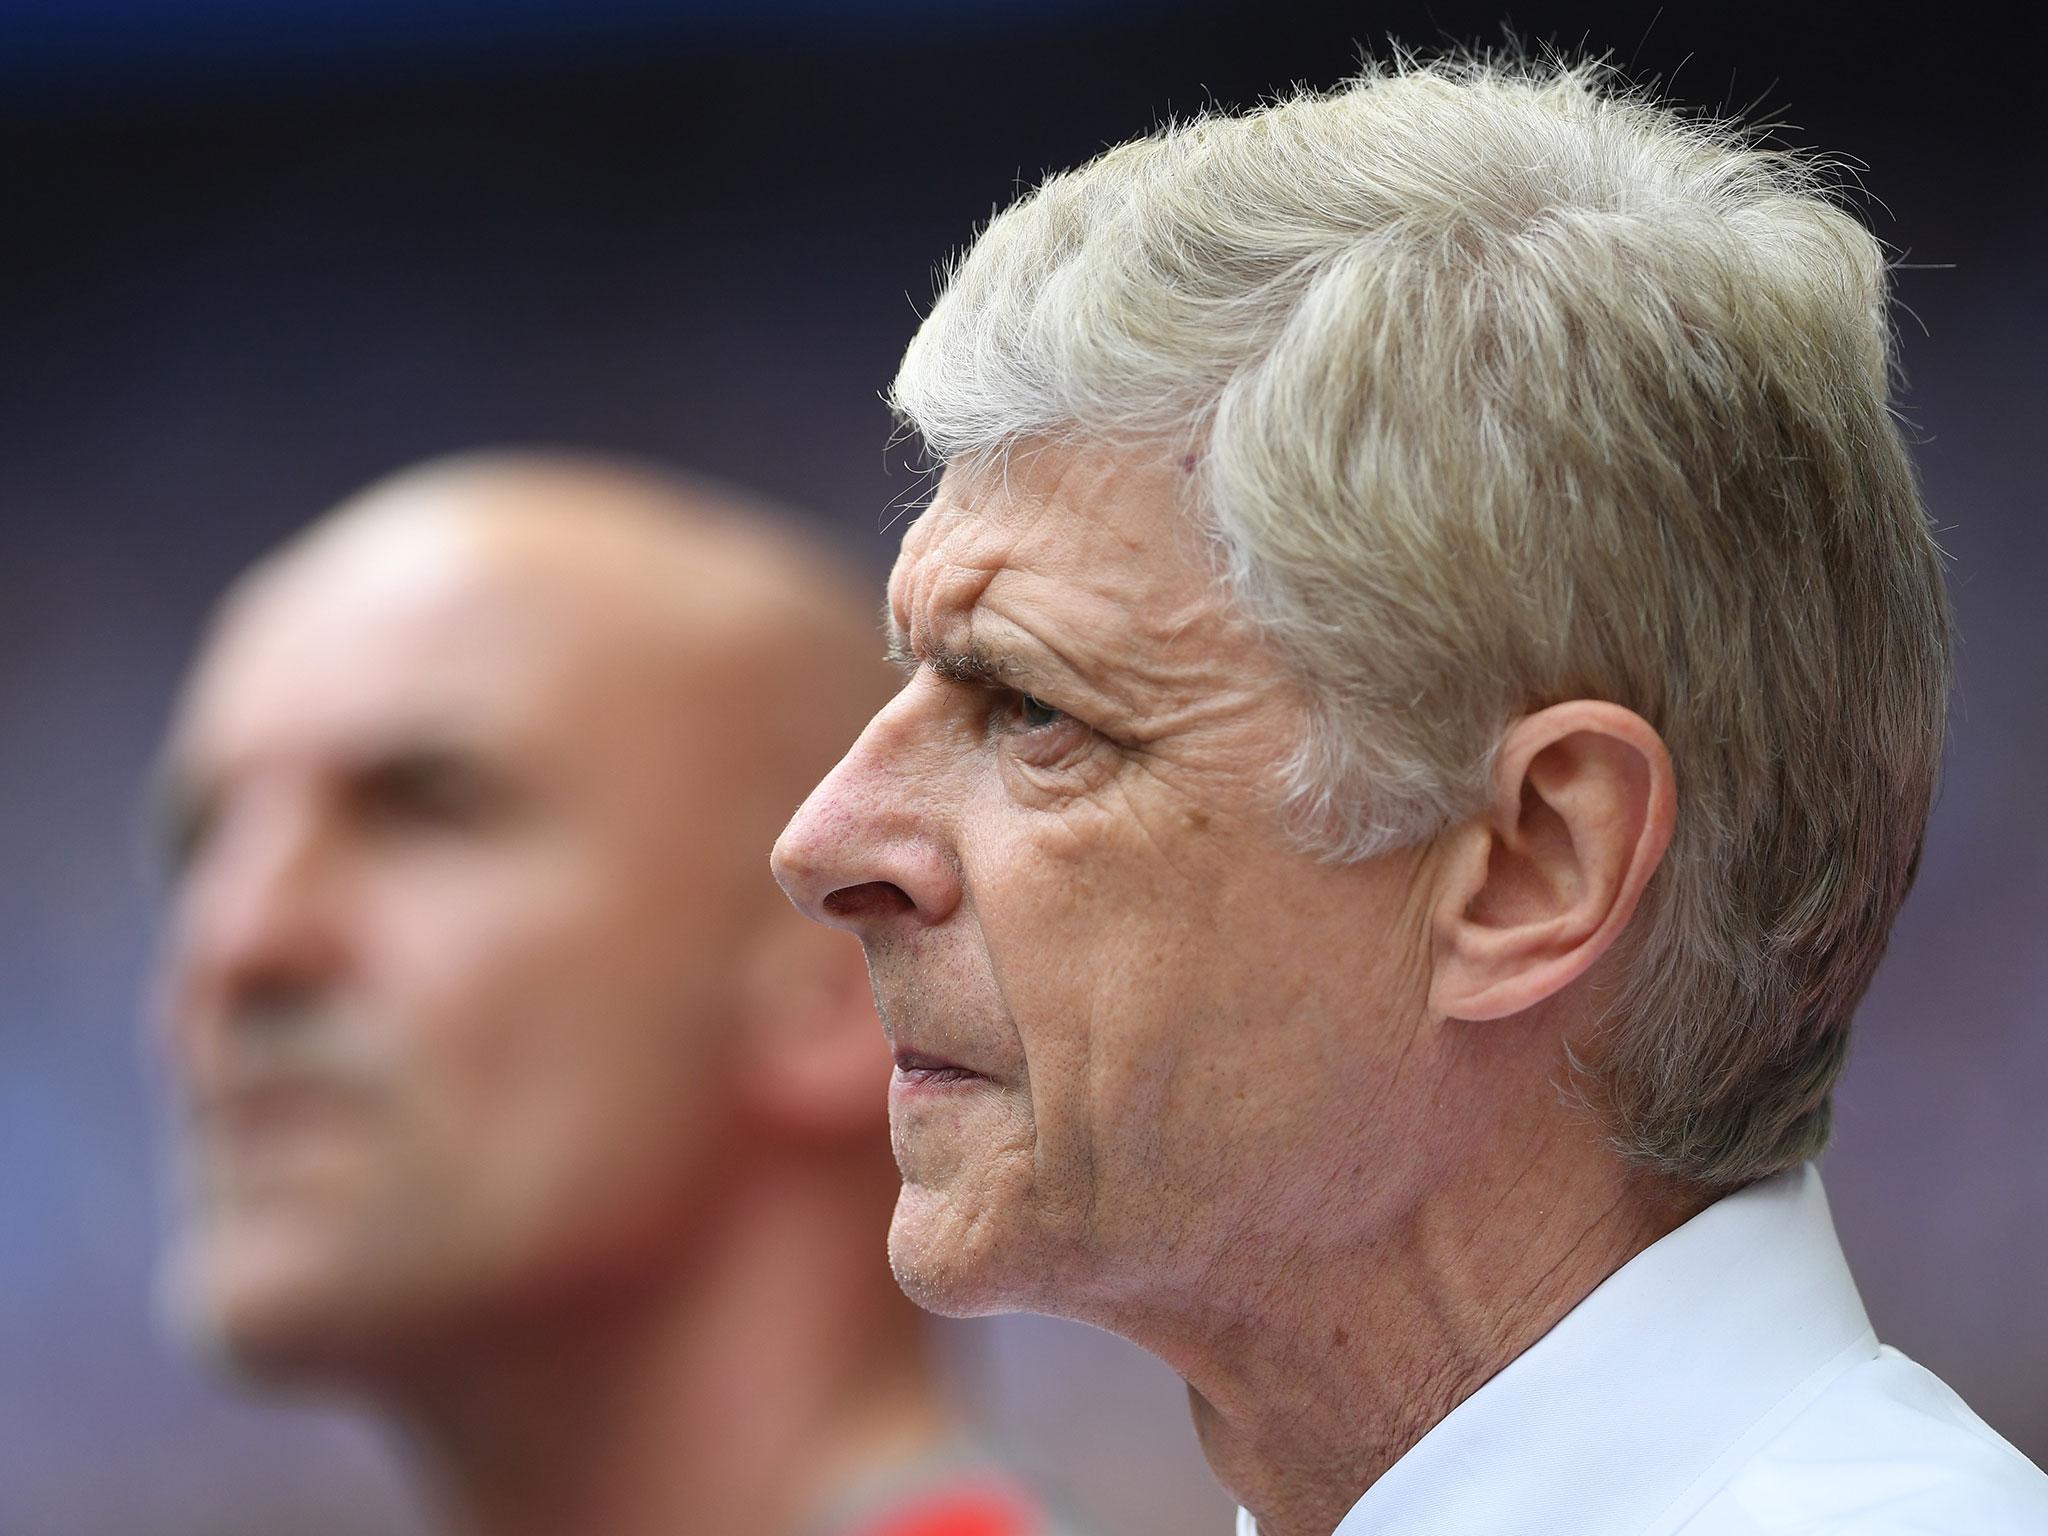 Wenger signed a new two-year contract with Arsenal on Wednesday